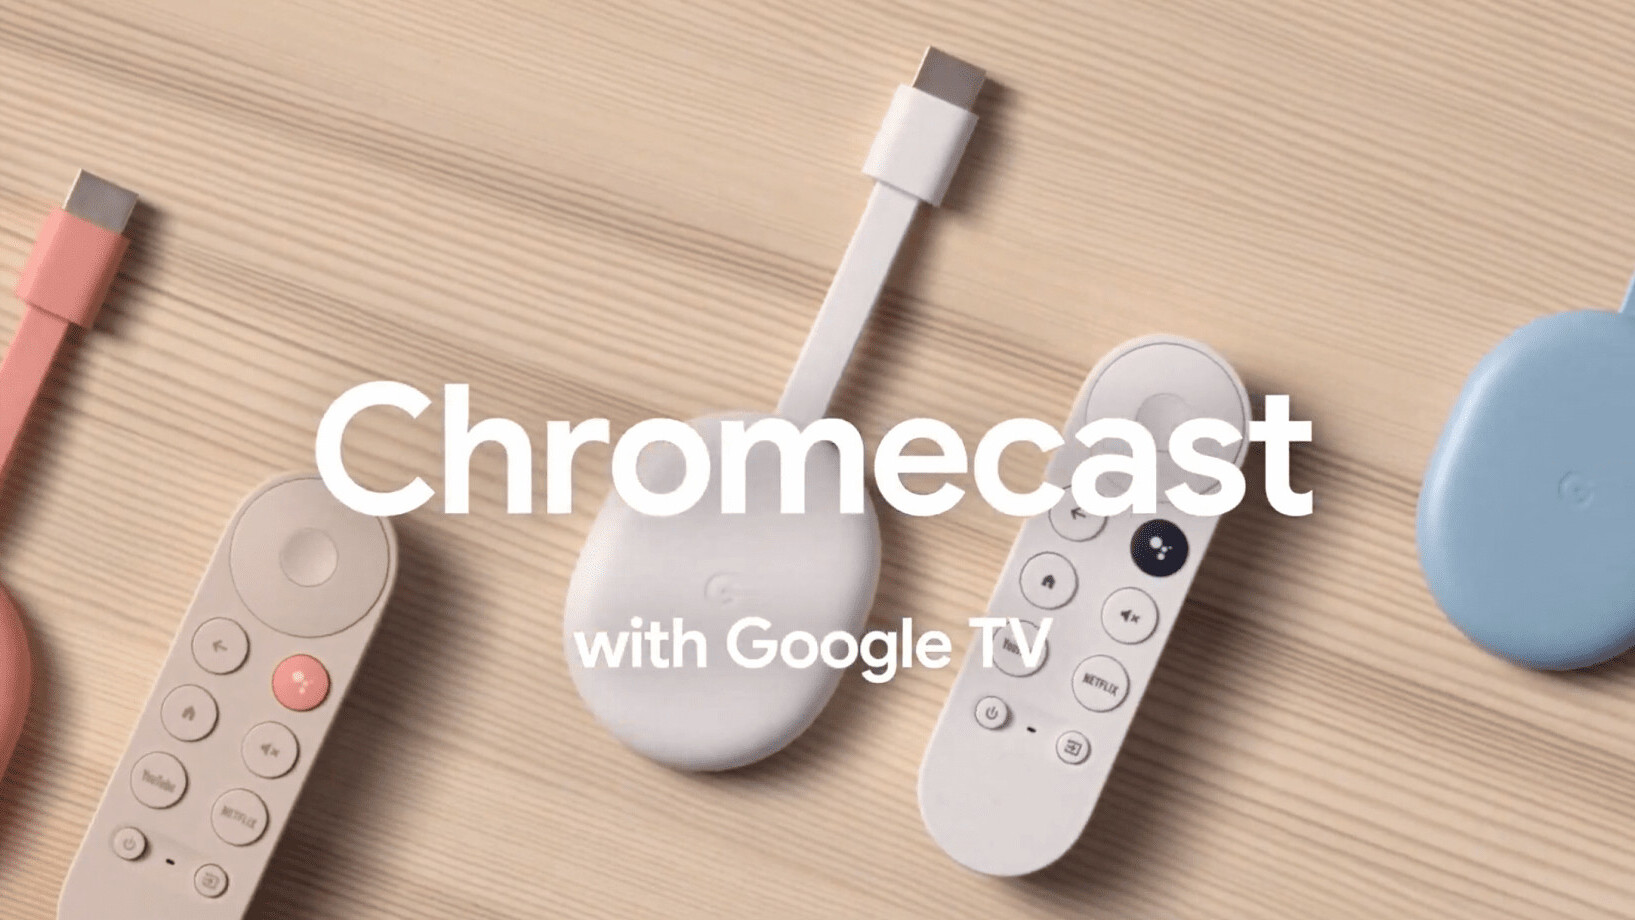 The new $50 Chromecast with ‘Google TV’ and a remote is now official